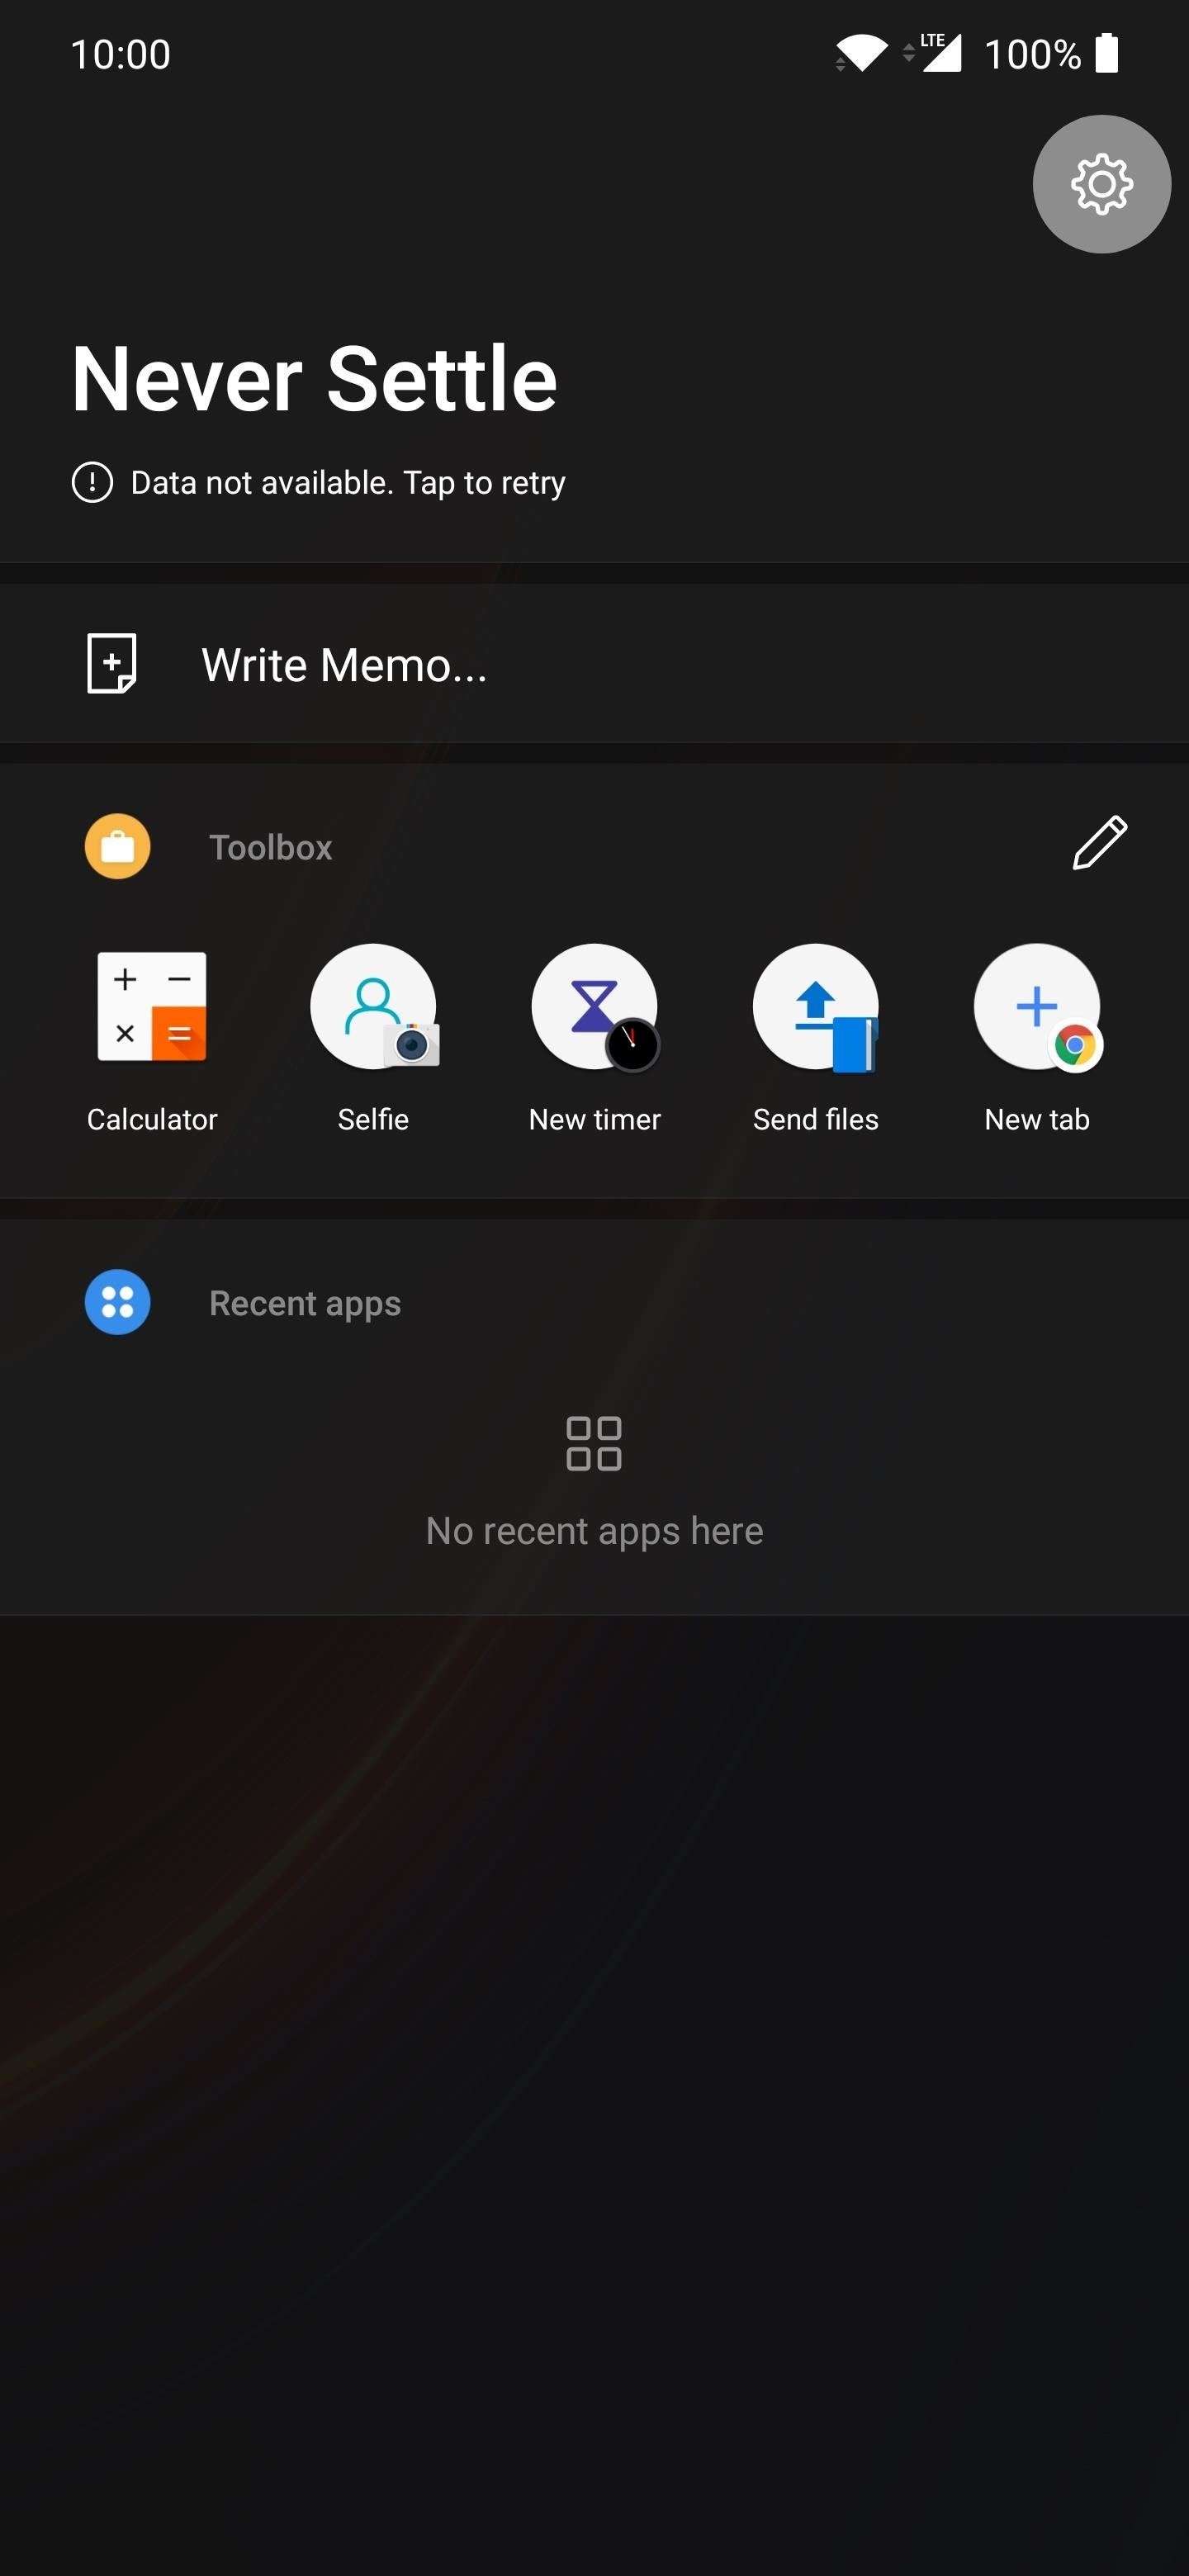 Your OnePlus Home Screen Has a Built-in Step Counter